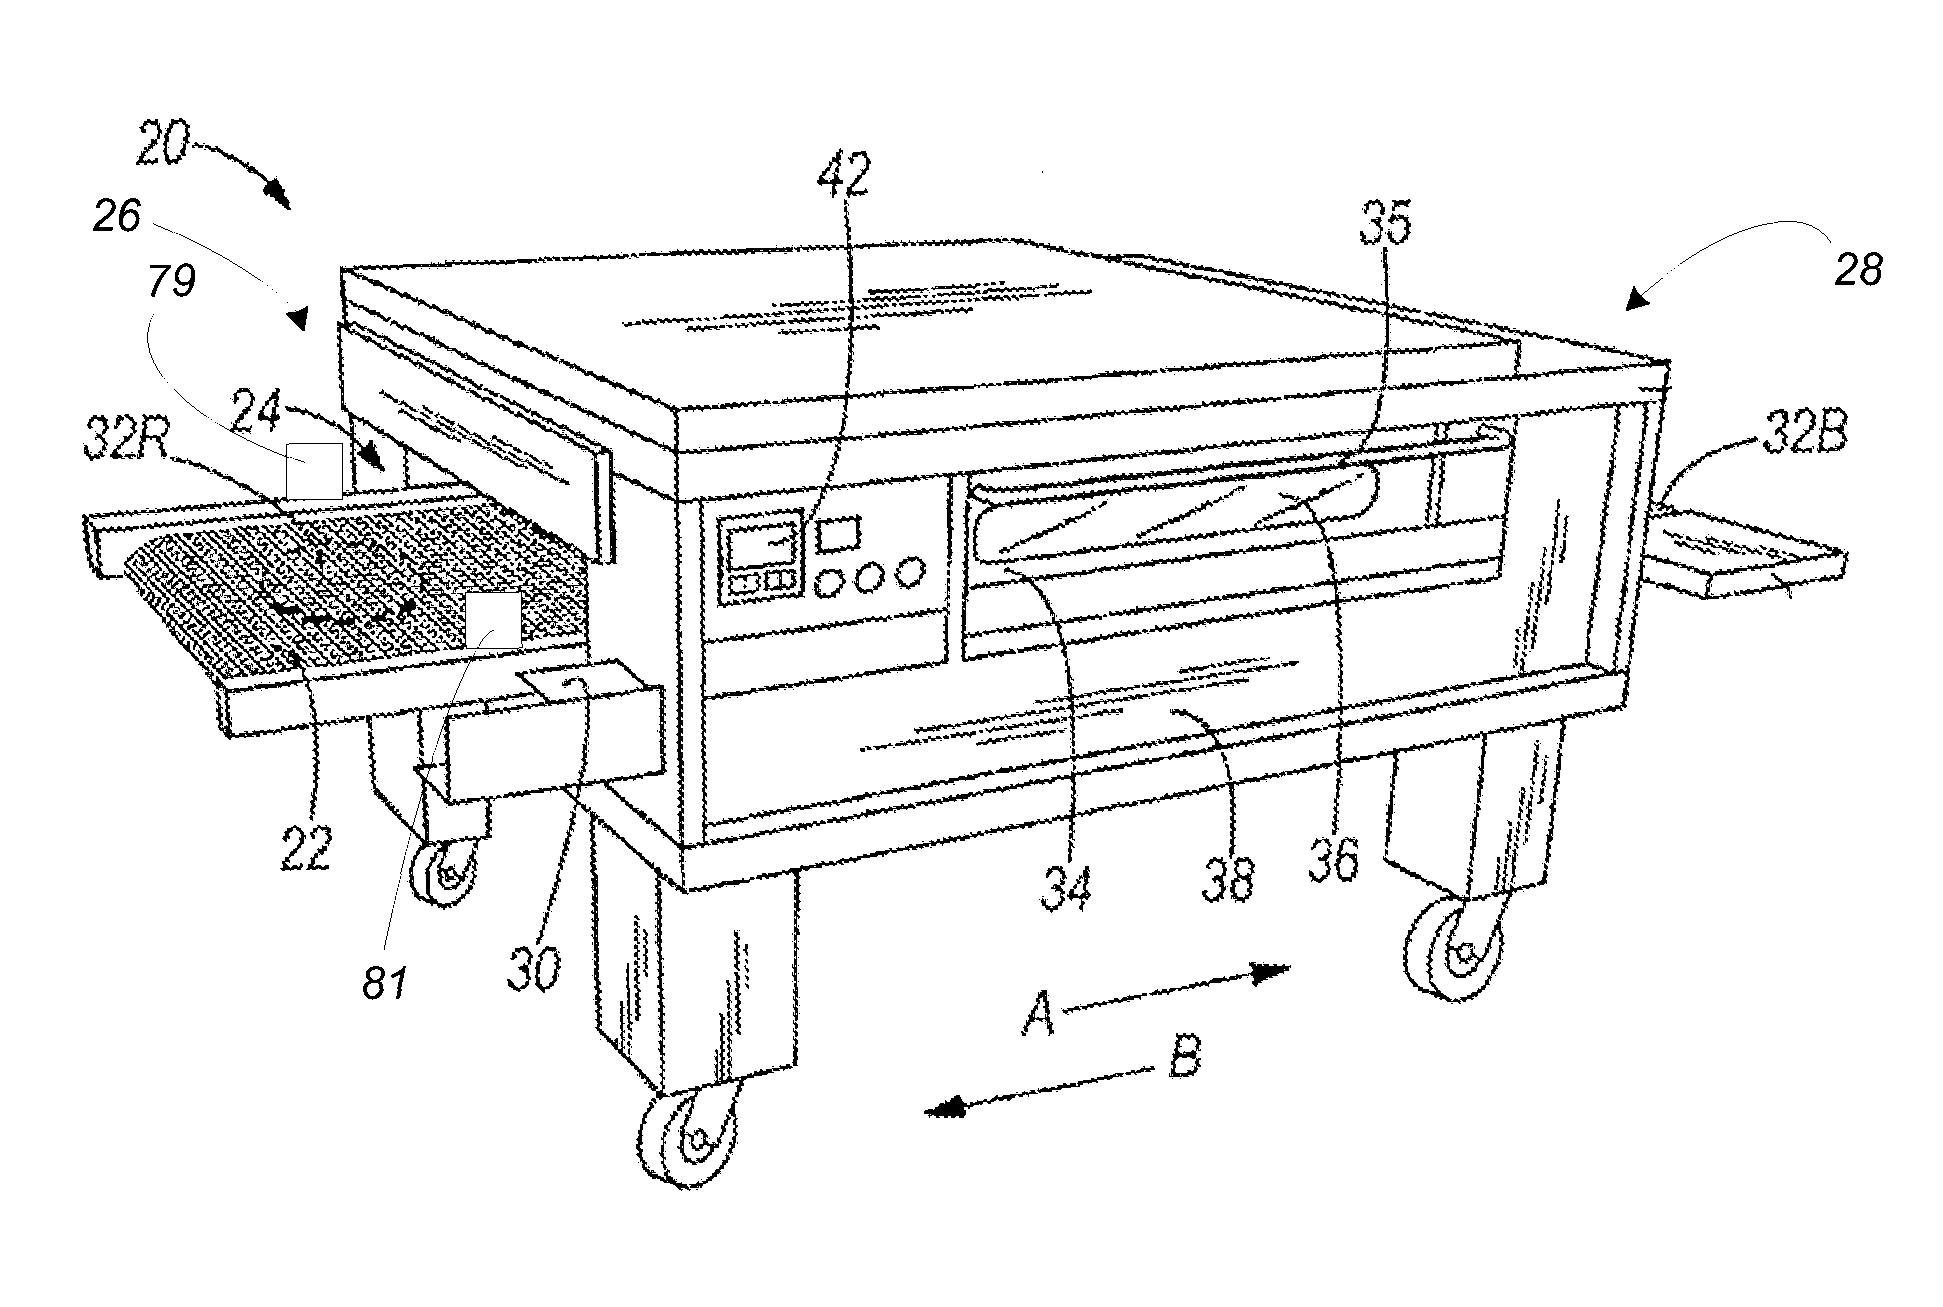 Conveyor oven apparatus and method